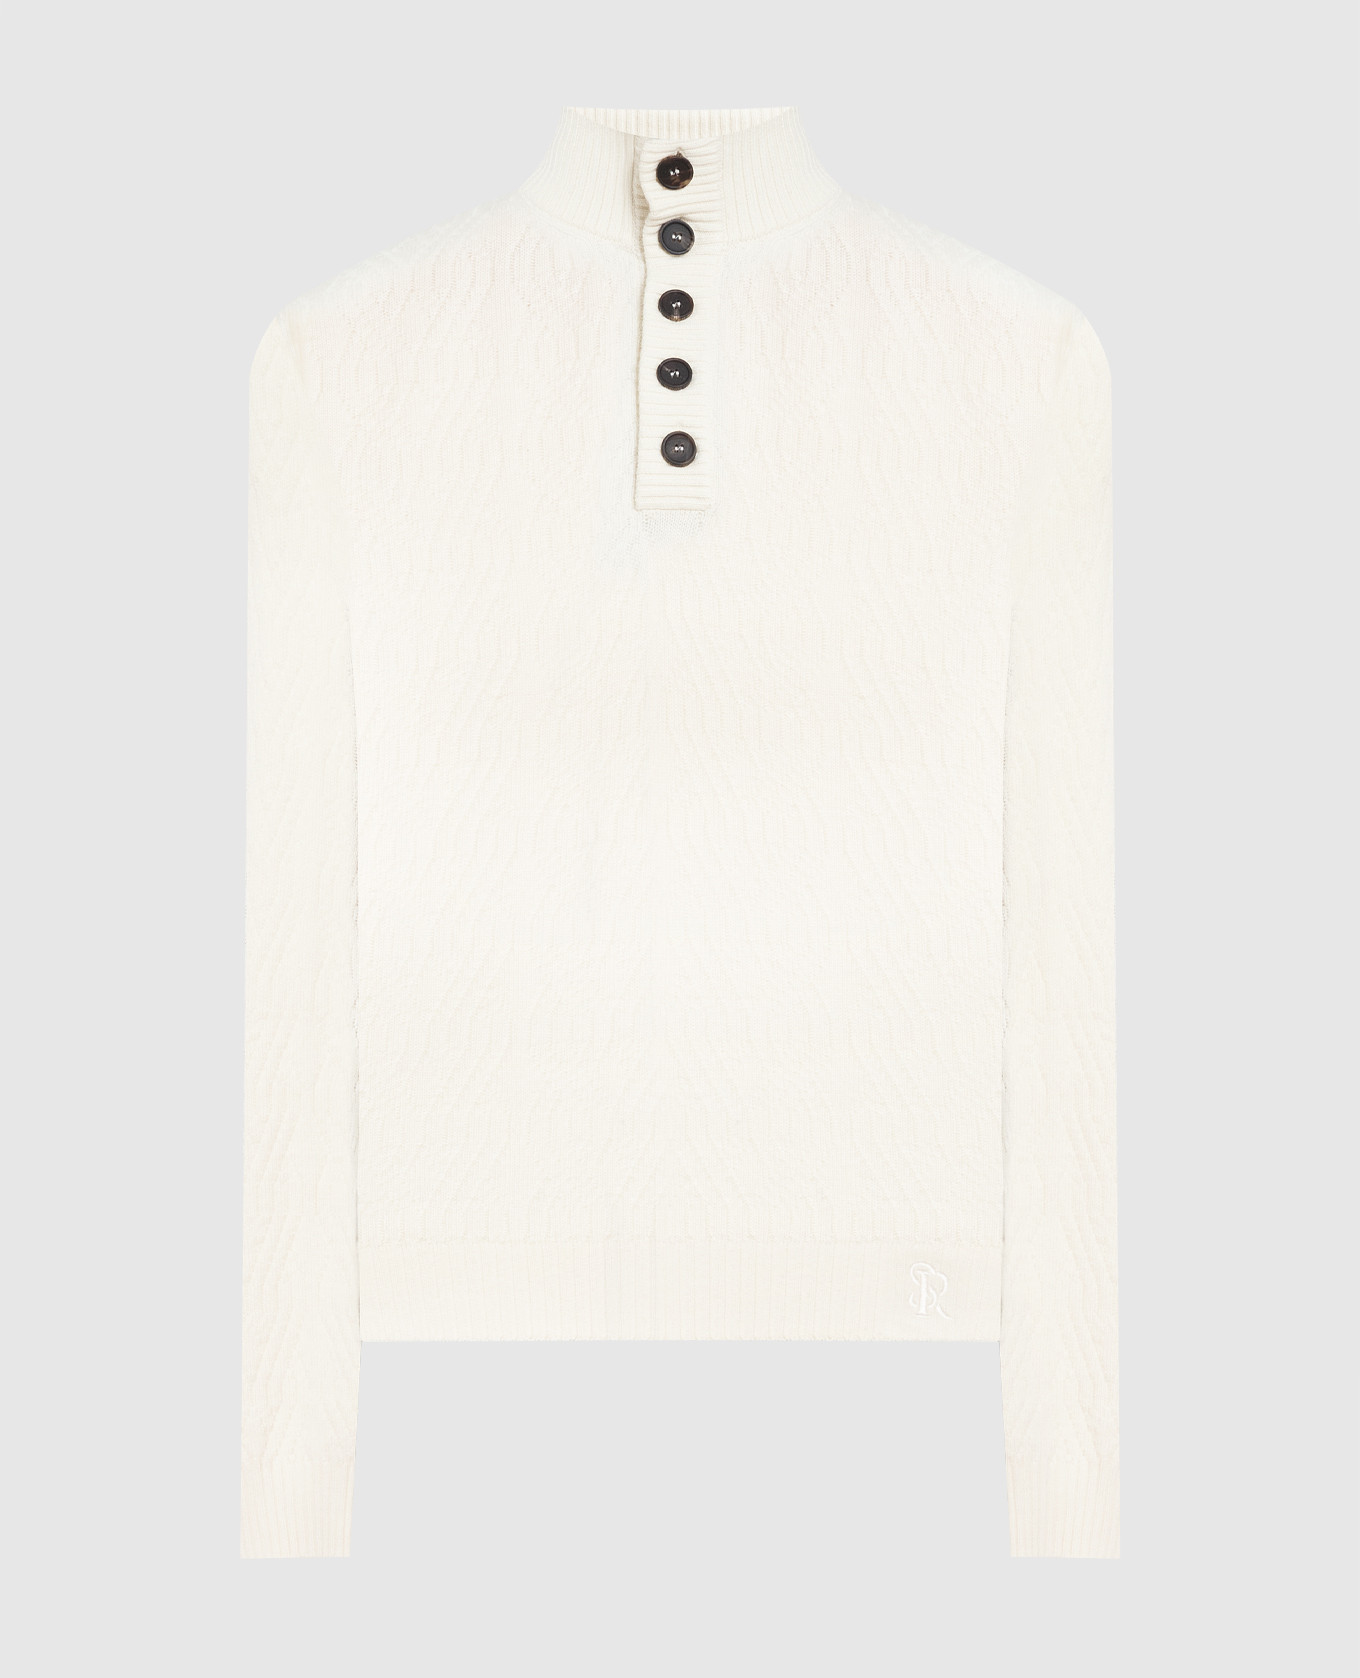 White wool and cashmere sweater